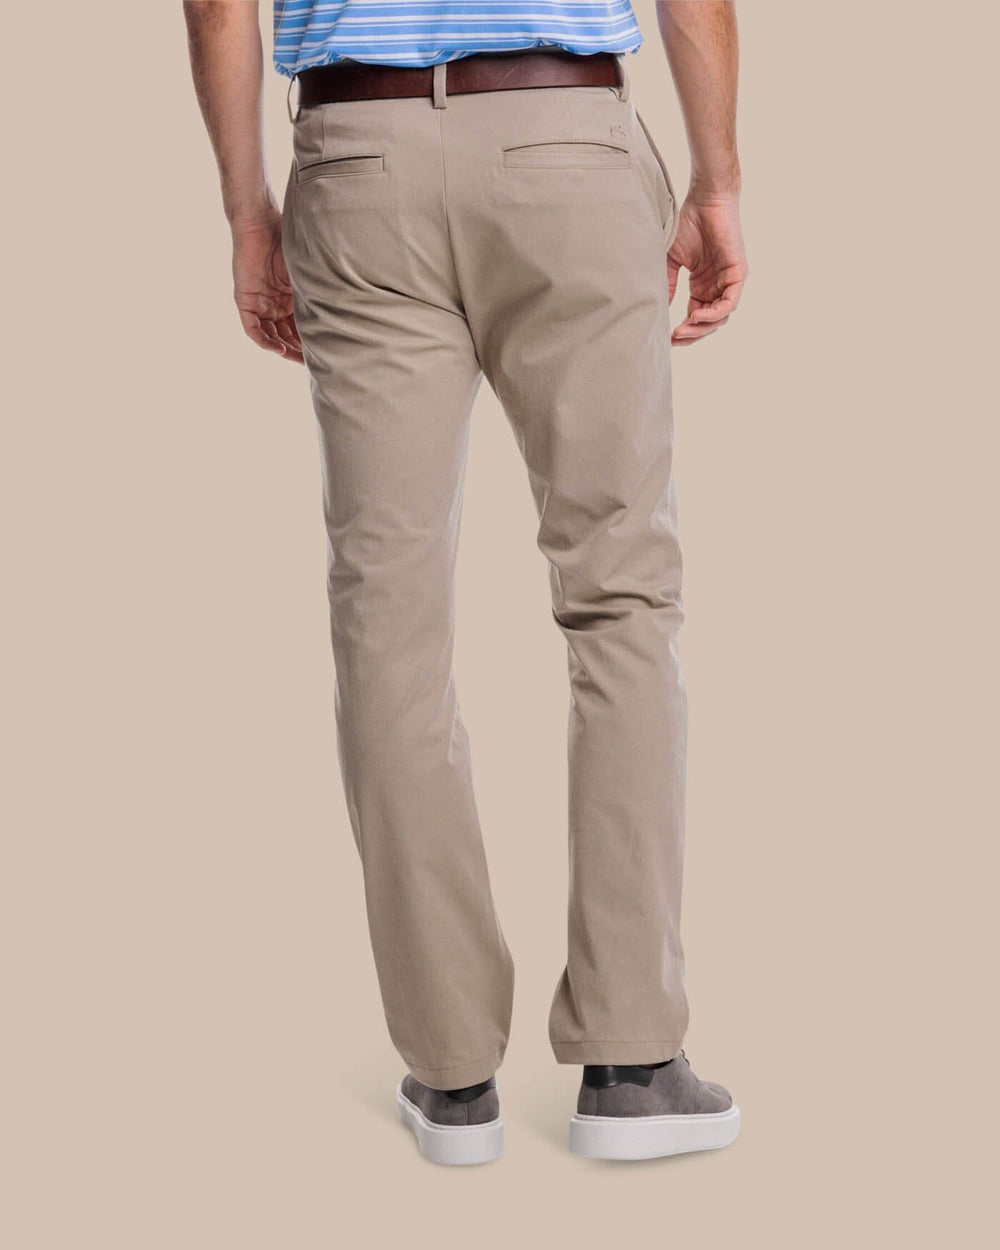 The back view of the Southern Tide Jack Performance Pant by Southern Tide - Sandstone Khaki